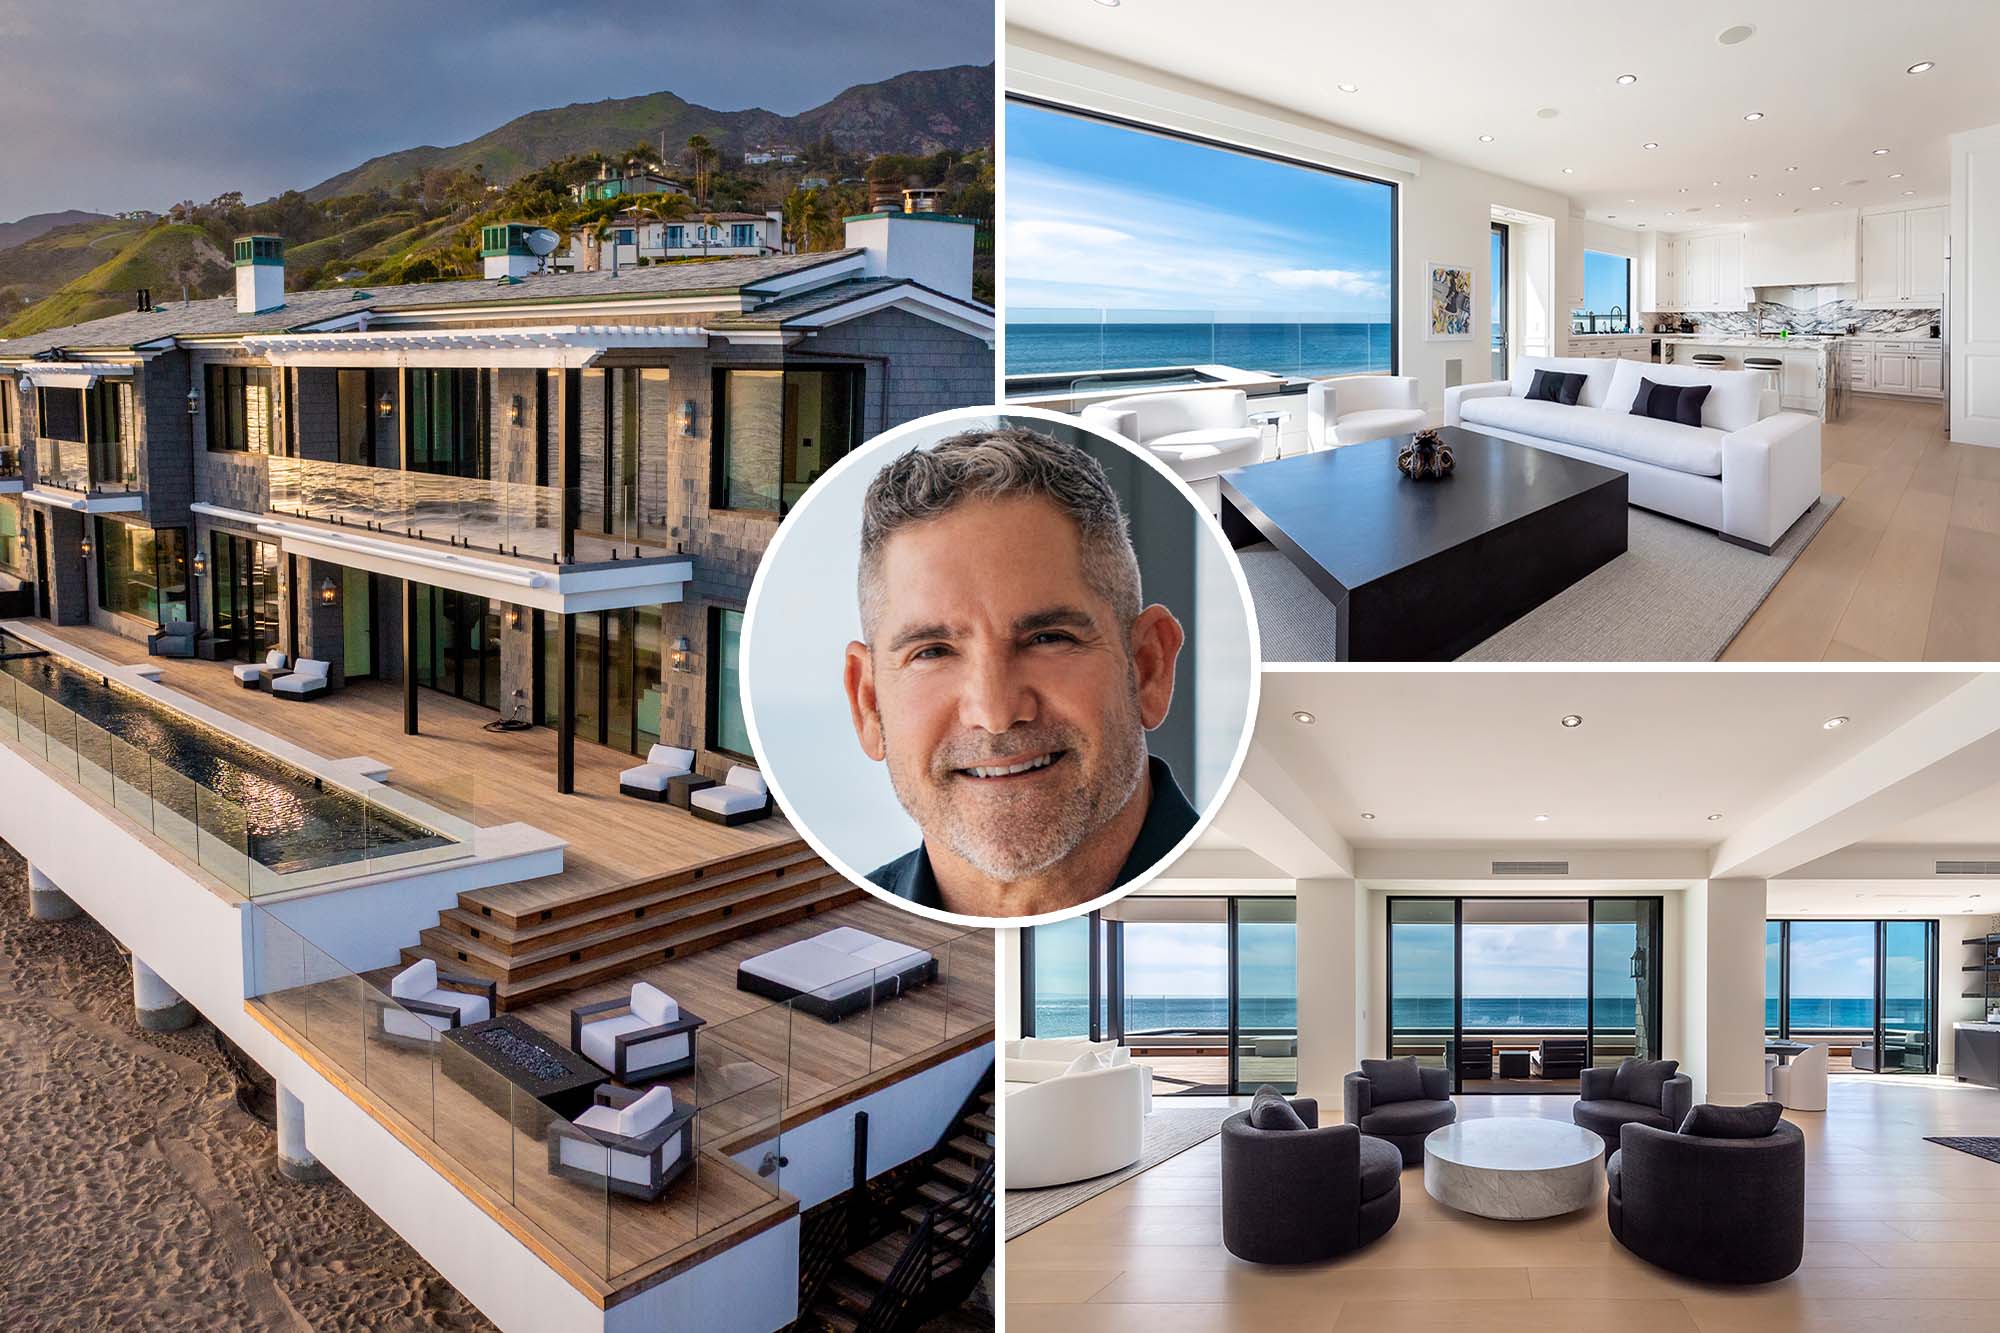 Grant Cardone wants $65M for Malibu mansion on Billionaire’s Beach — with Bitcoin accepted